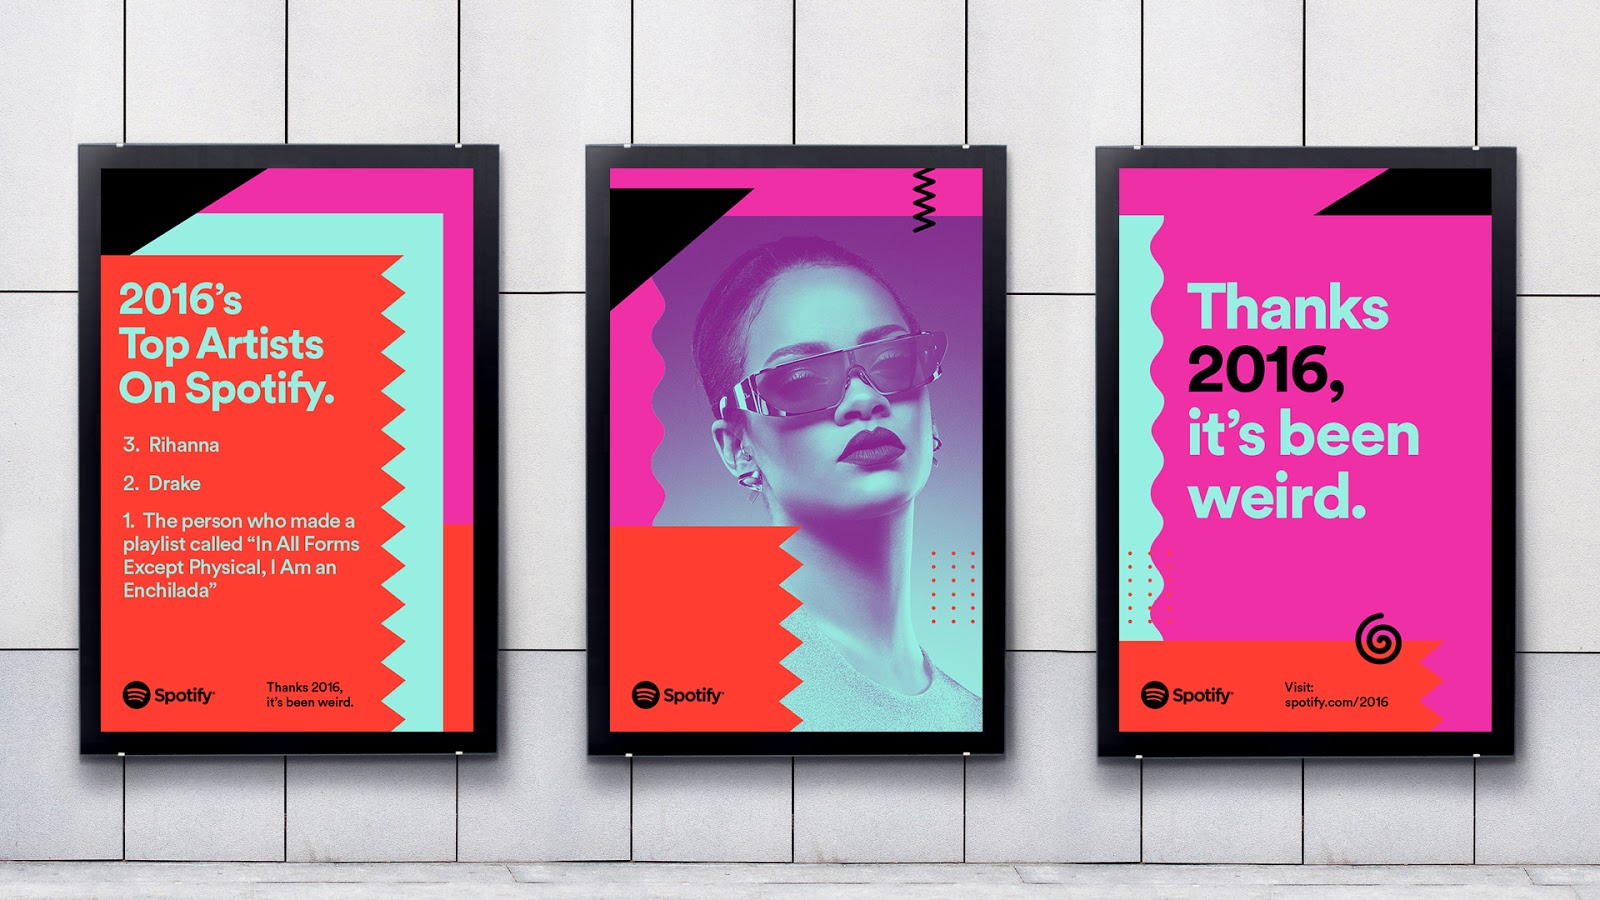 Thank's 2016 Spotify Marketing Campaign